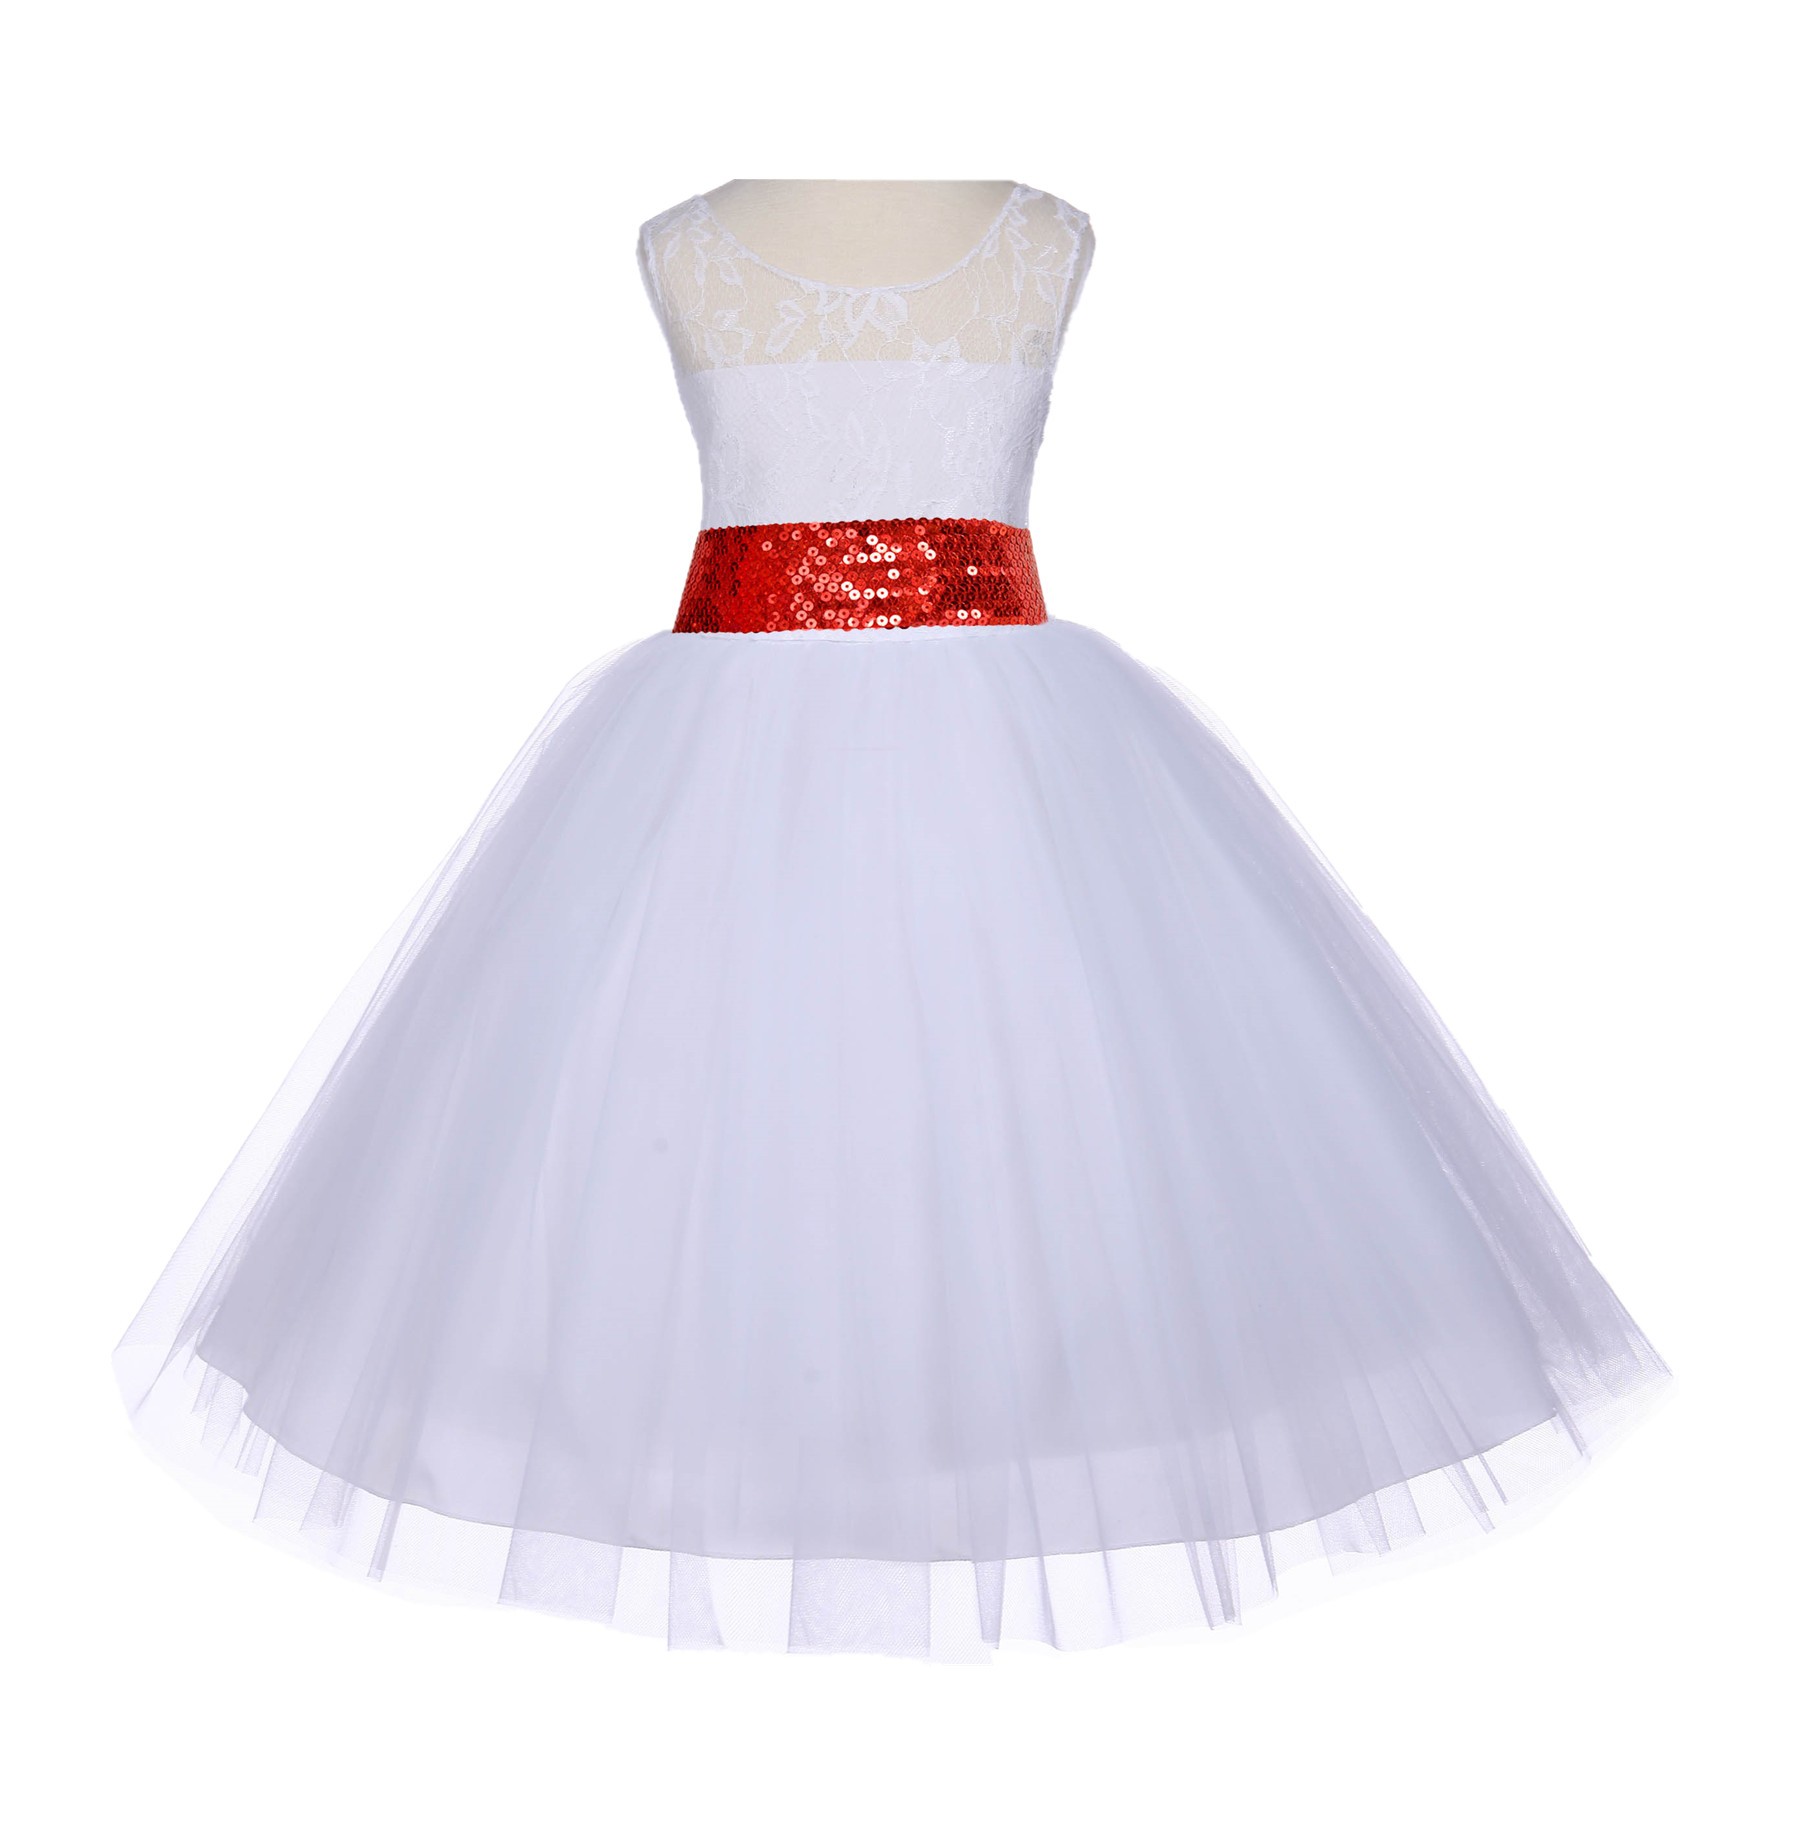 White Floral Lace Bodice Tulle Red Sequin Flower Girl Dress 153mh